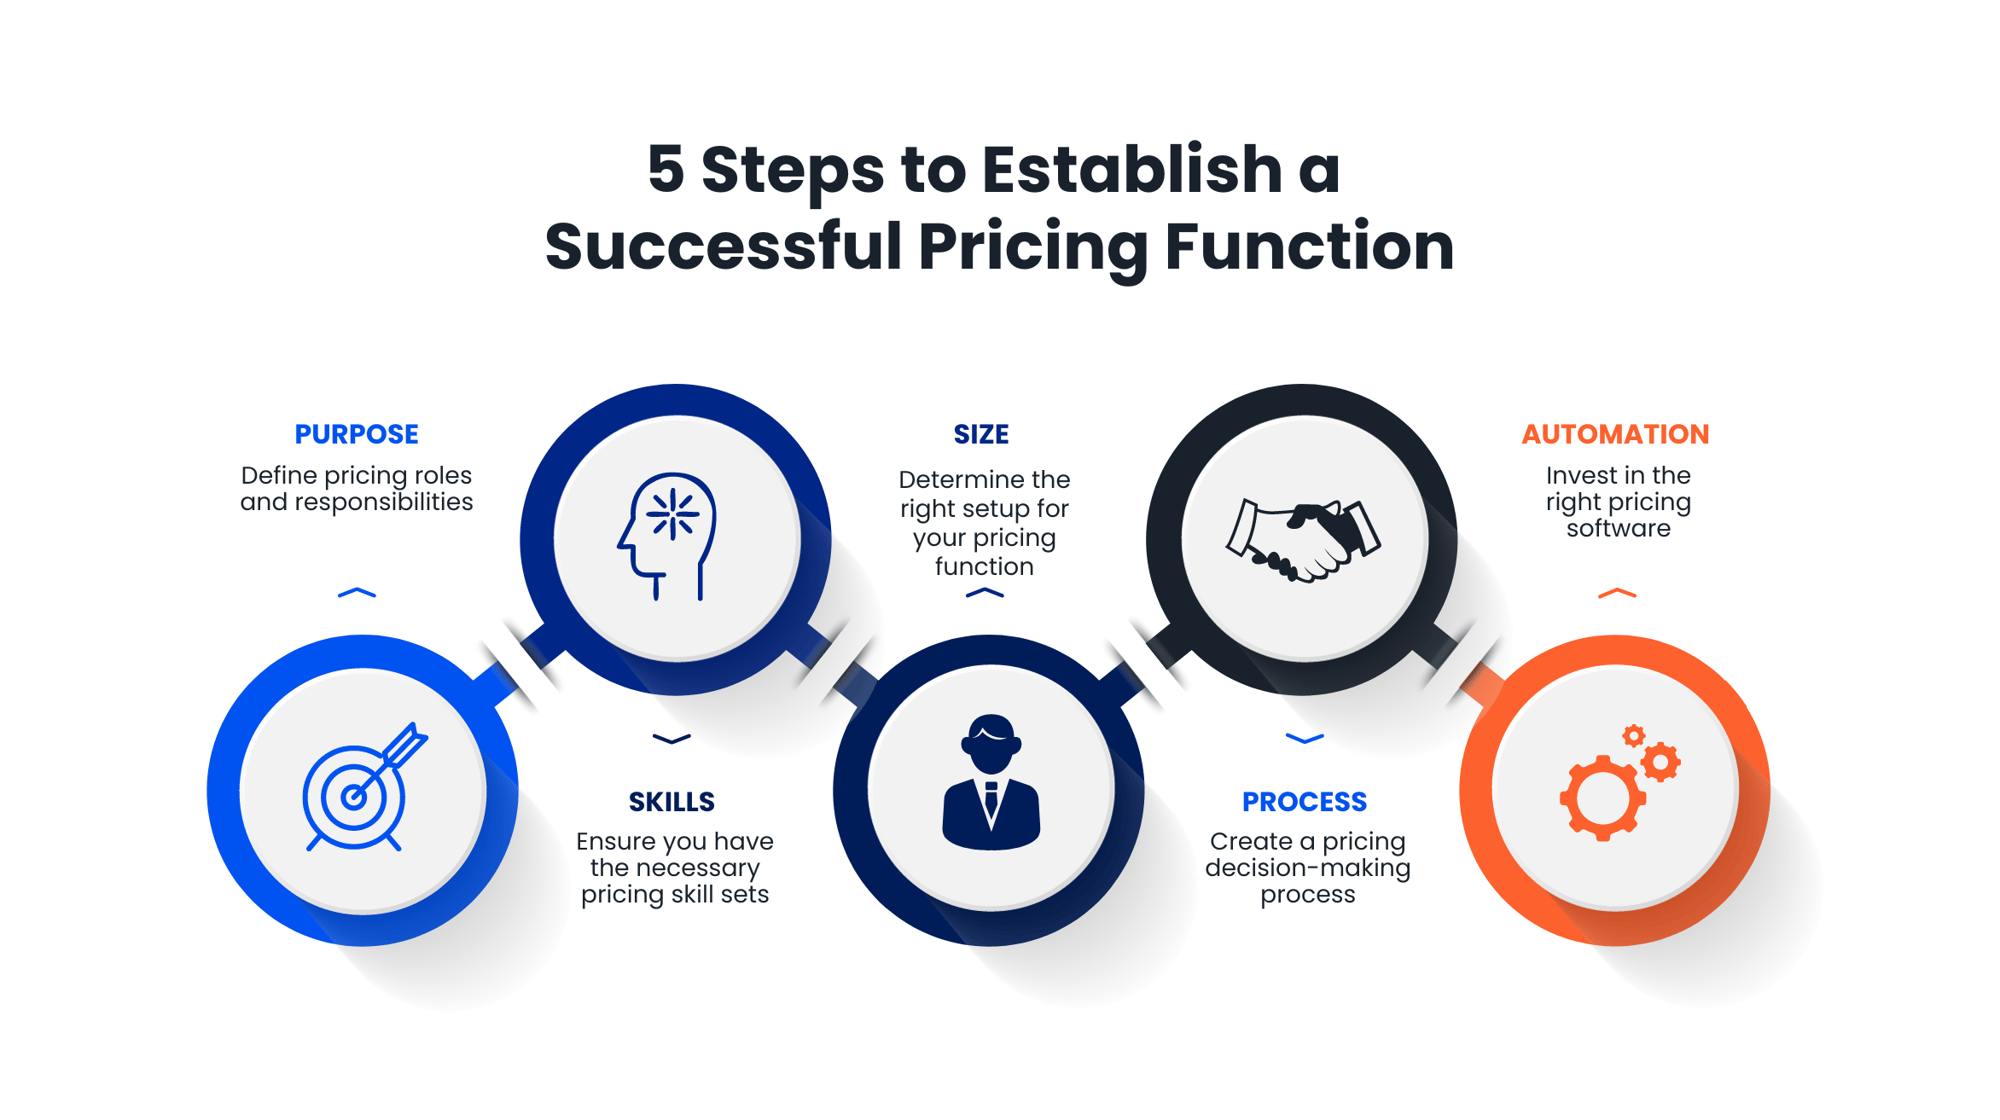 5-Steps-to-Establish-a-Successful-Pricing-Function-2